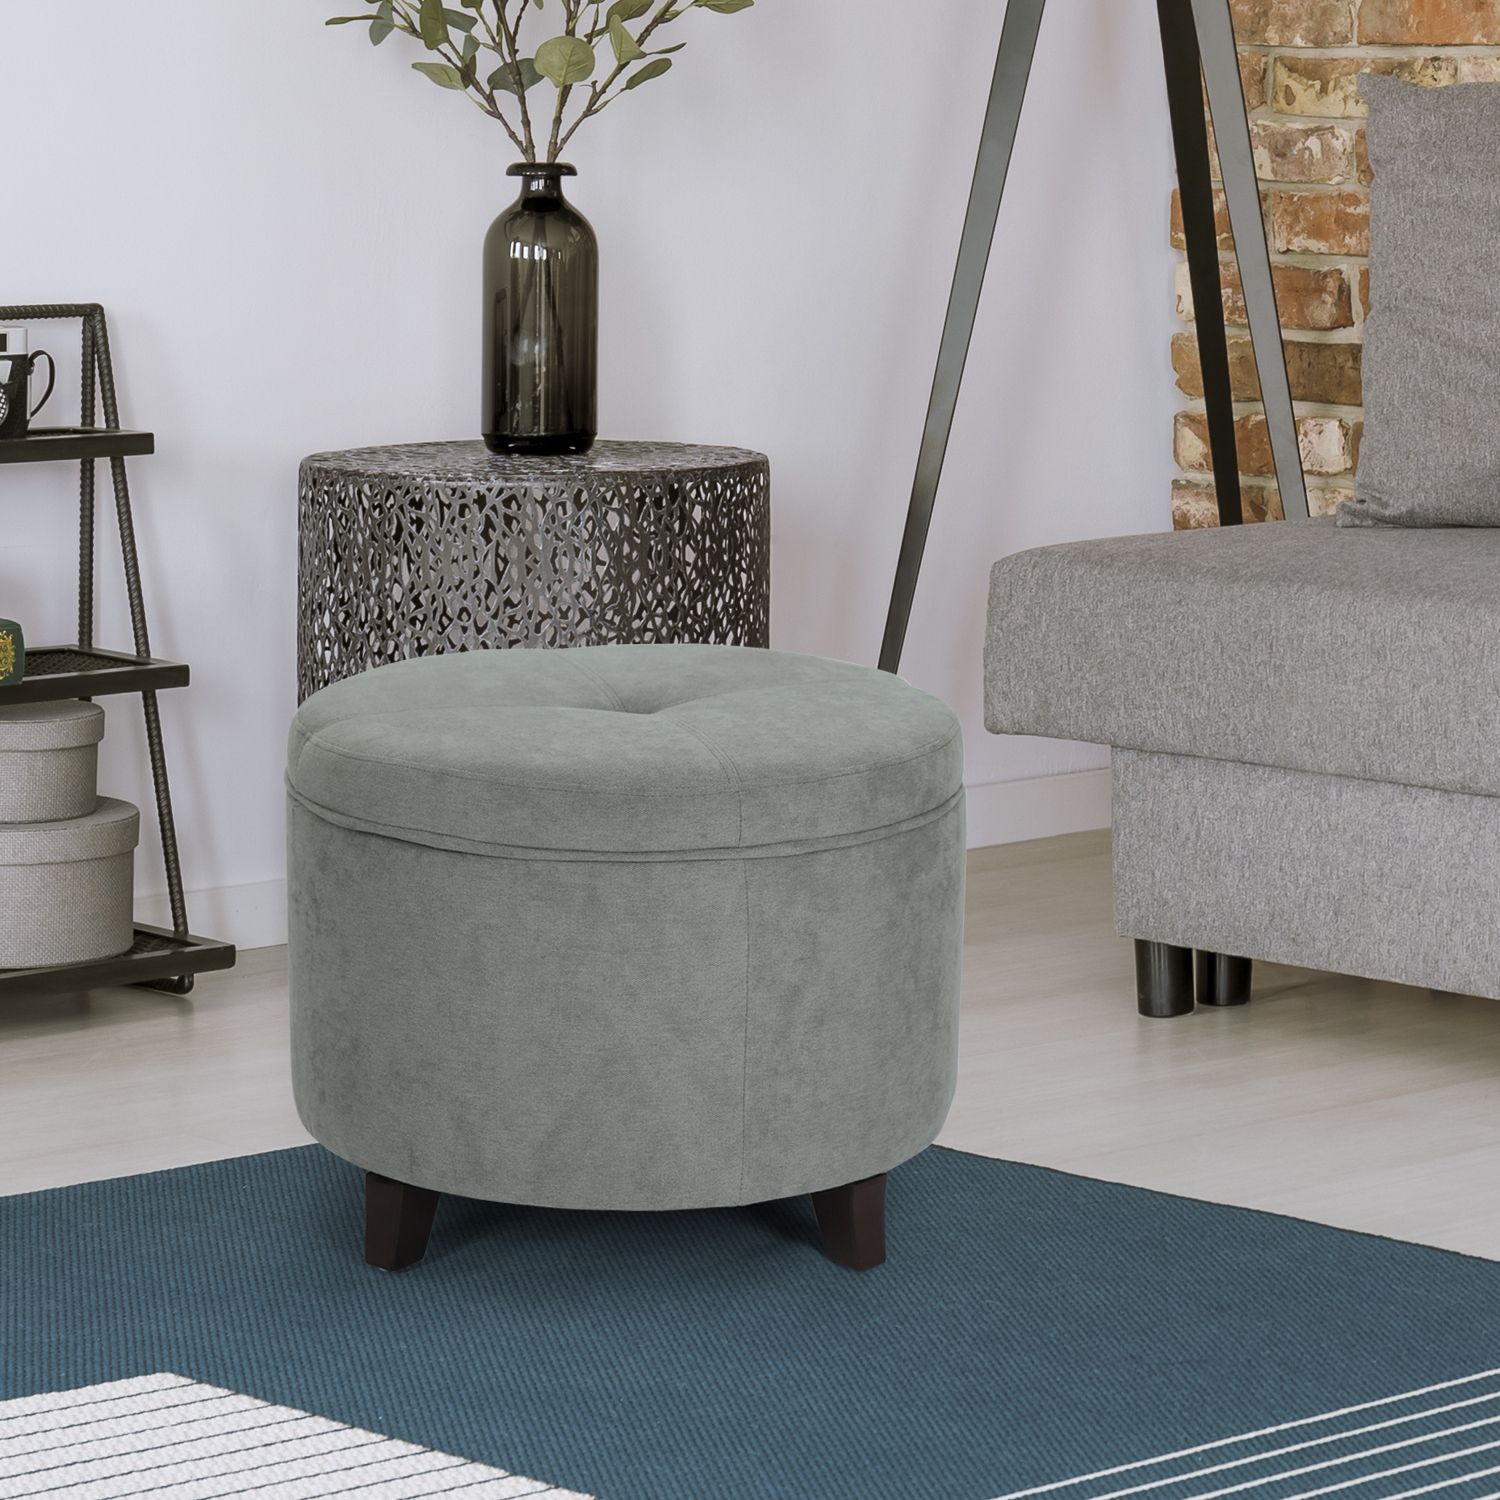 Most Recent Joveco Round Storage Ottoman, Button Tufted Fabric Footstool With For Velvet Ribbed Fabric Round Storage Ottomans (View 7 of 10)